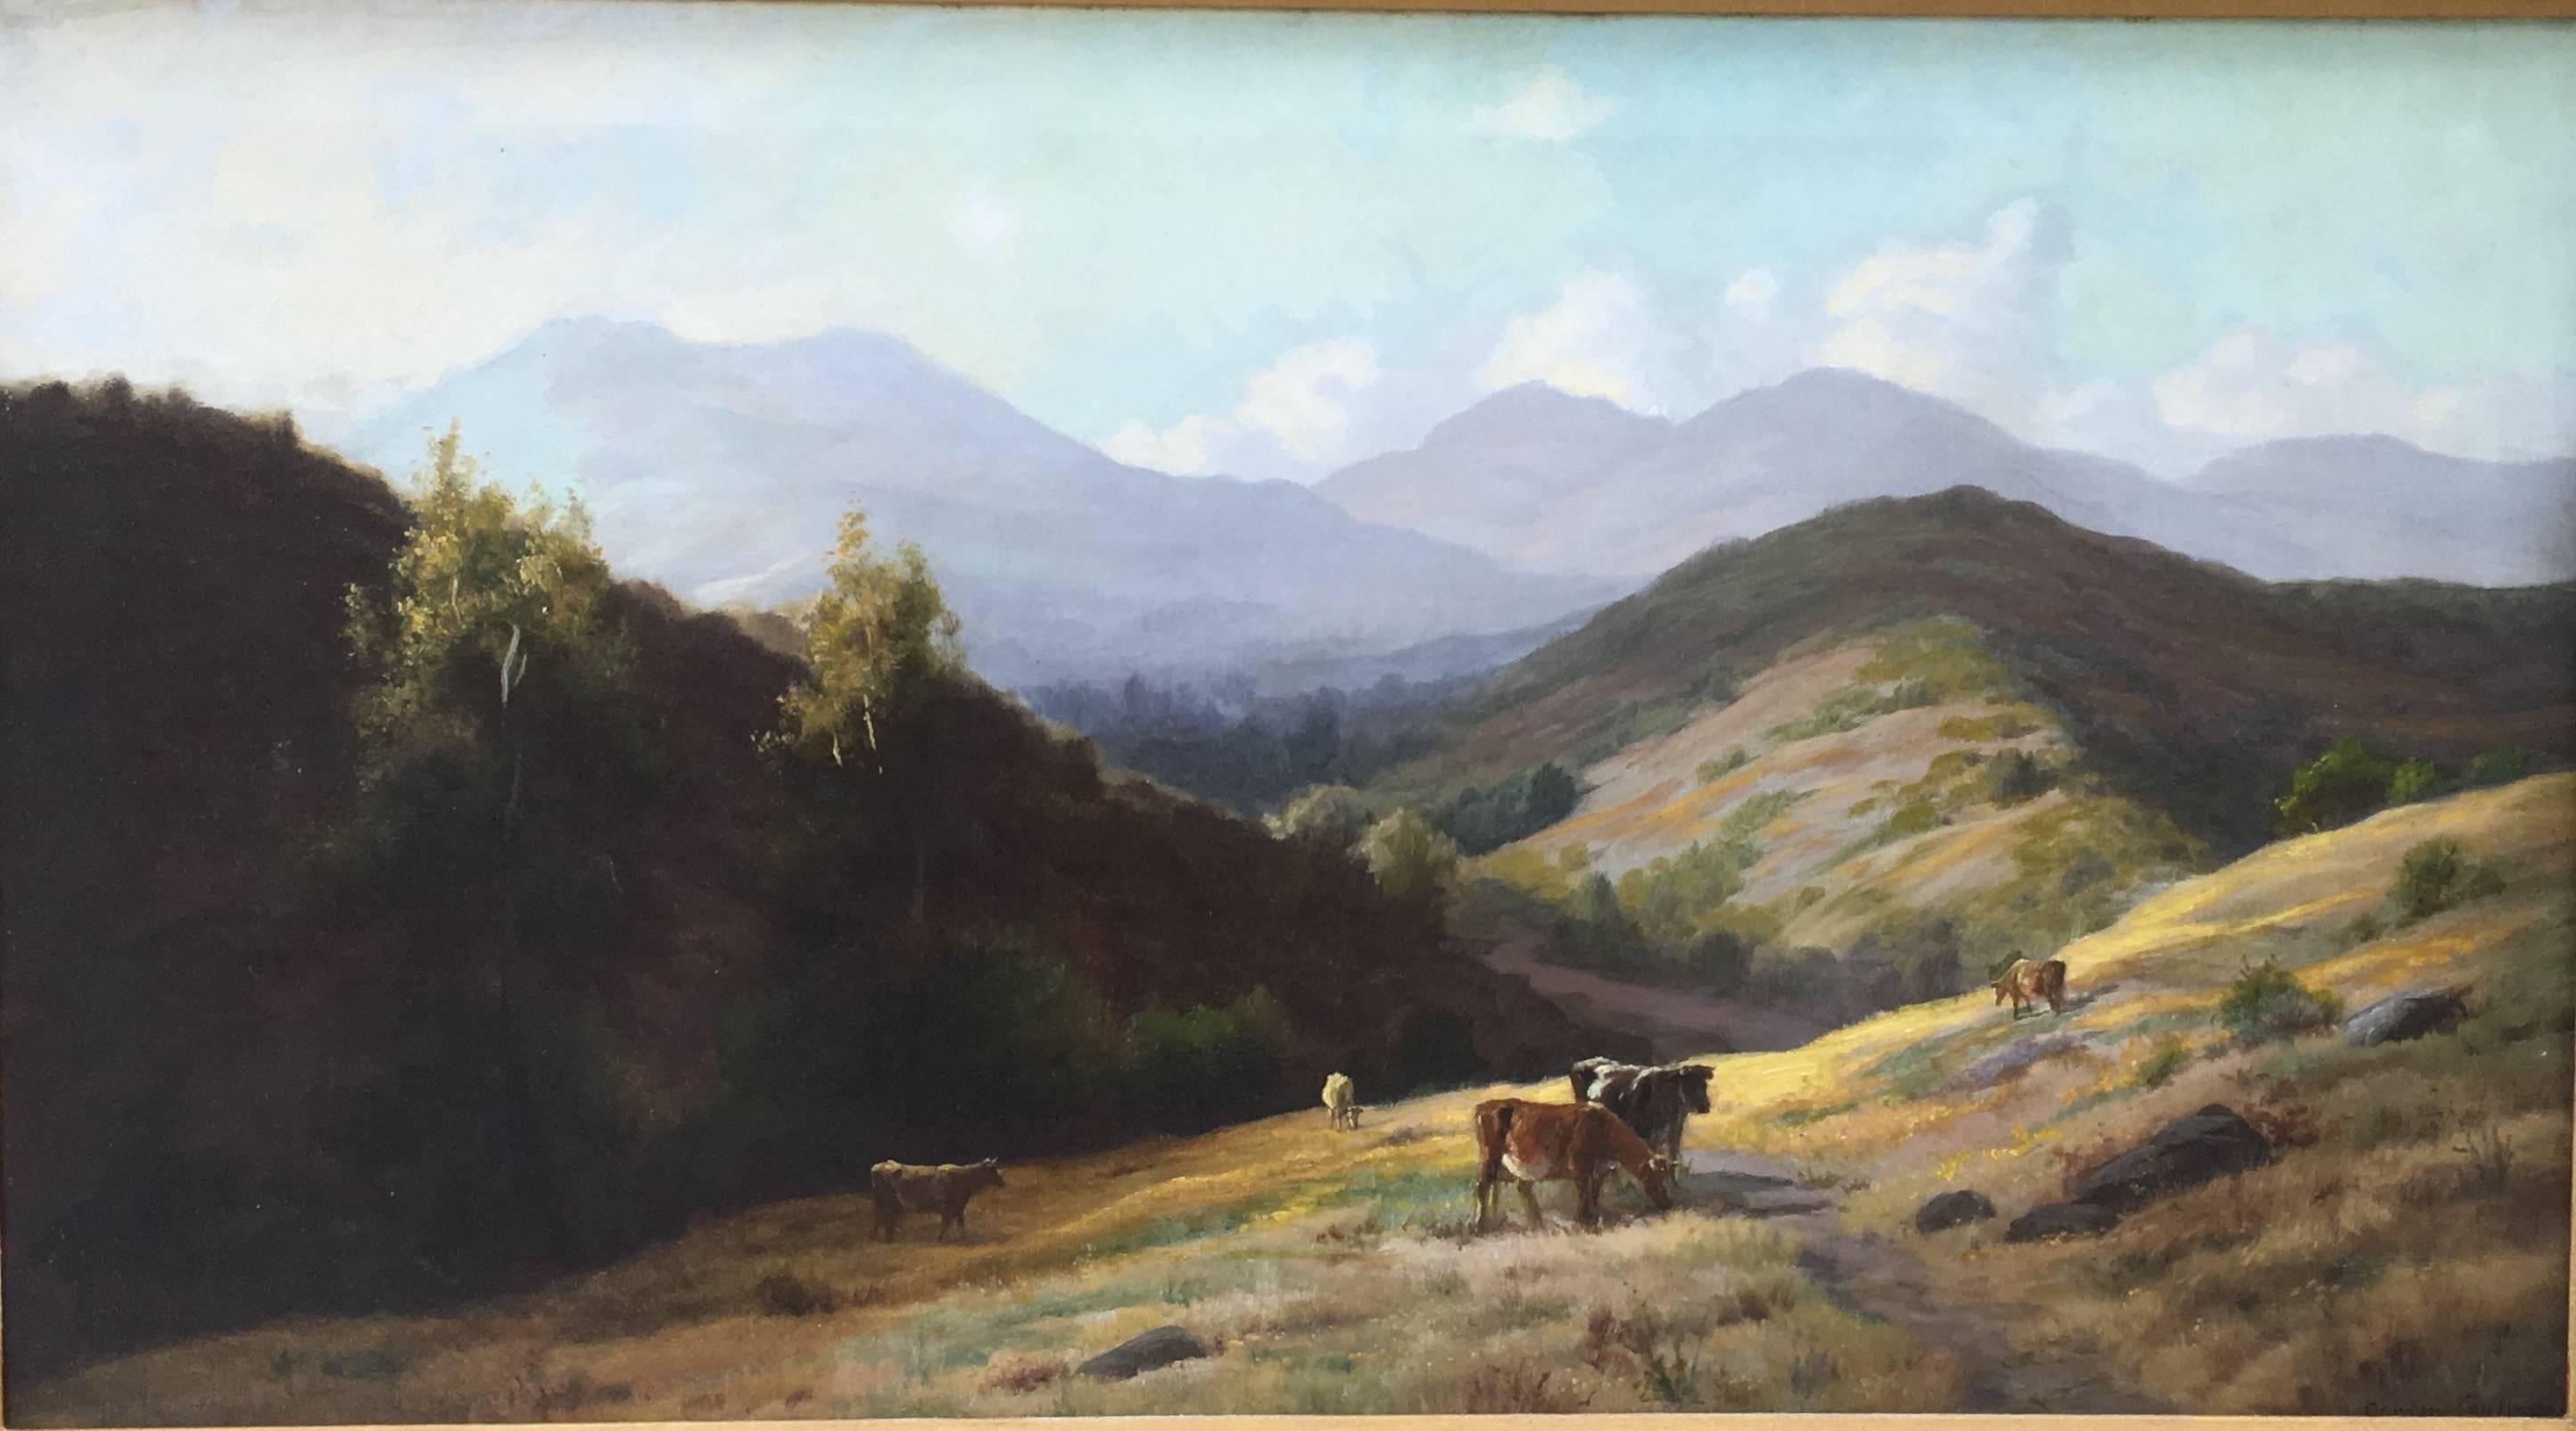 Gordon Coutts Landscape Painting - Cattle Grazing in the Hills, Marin County, California